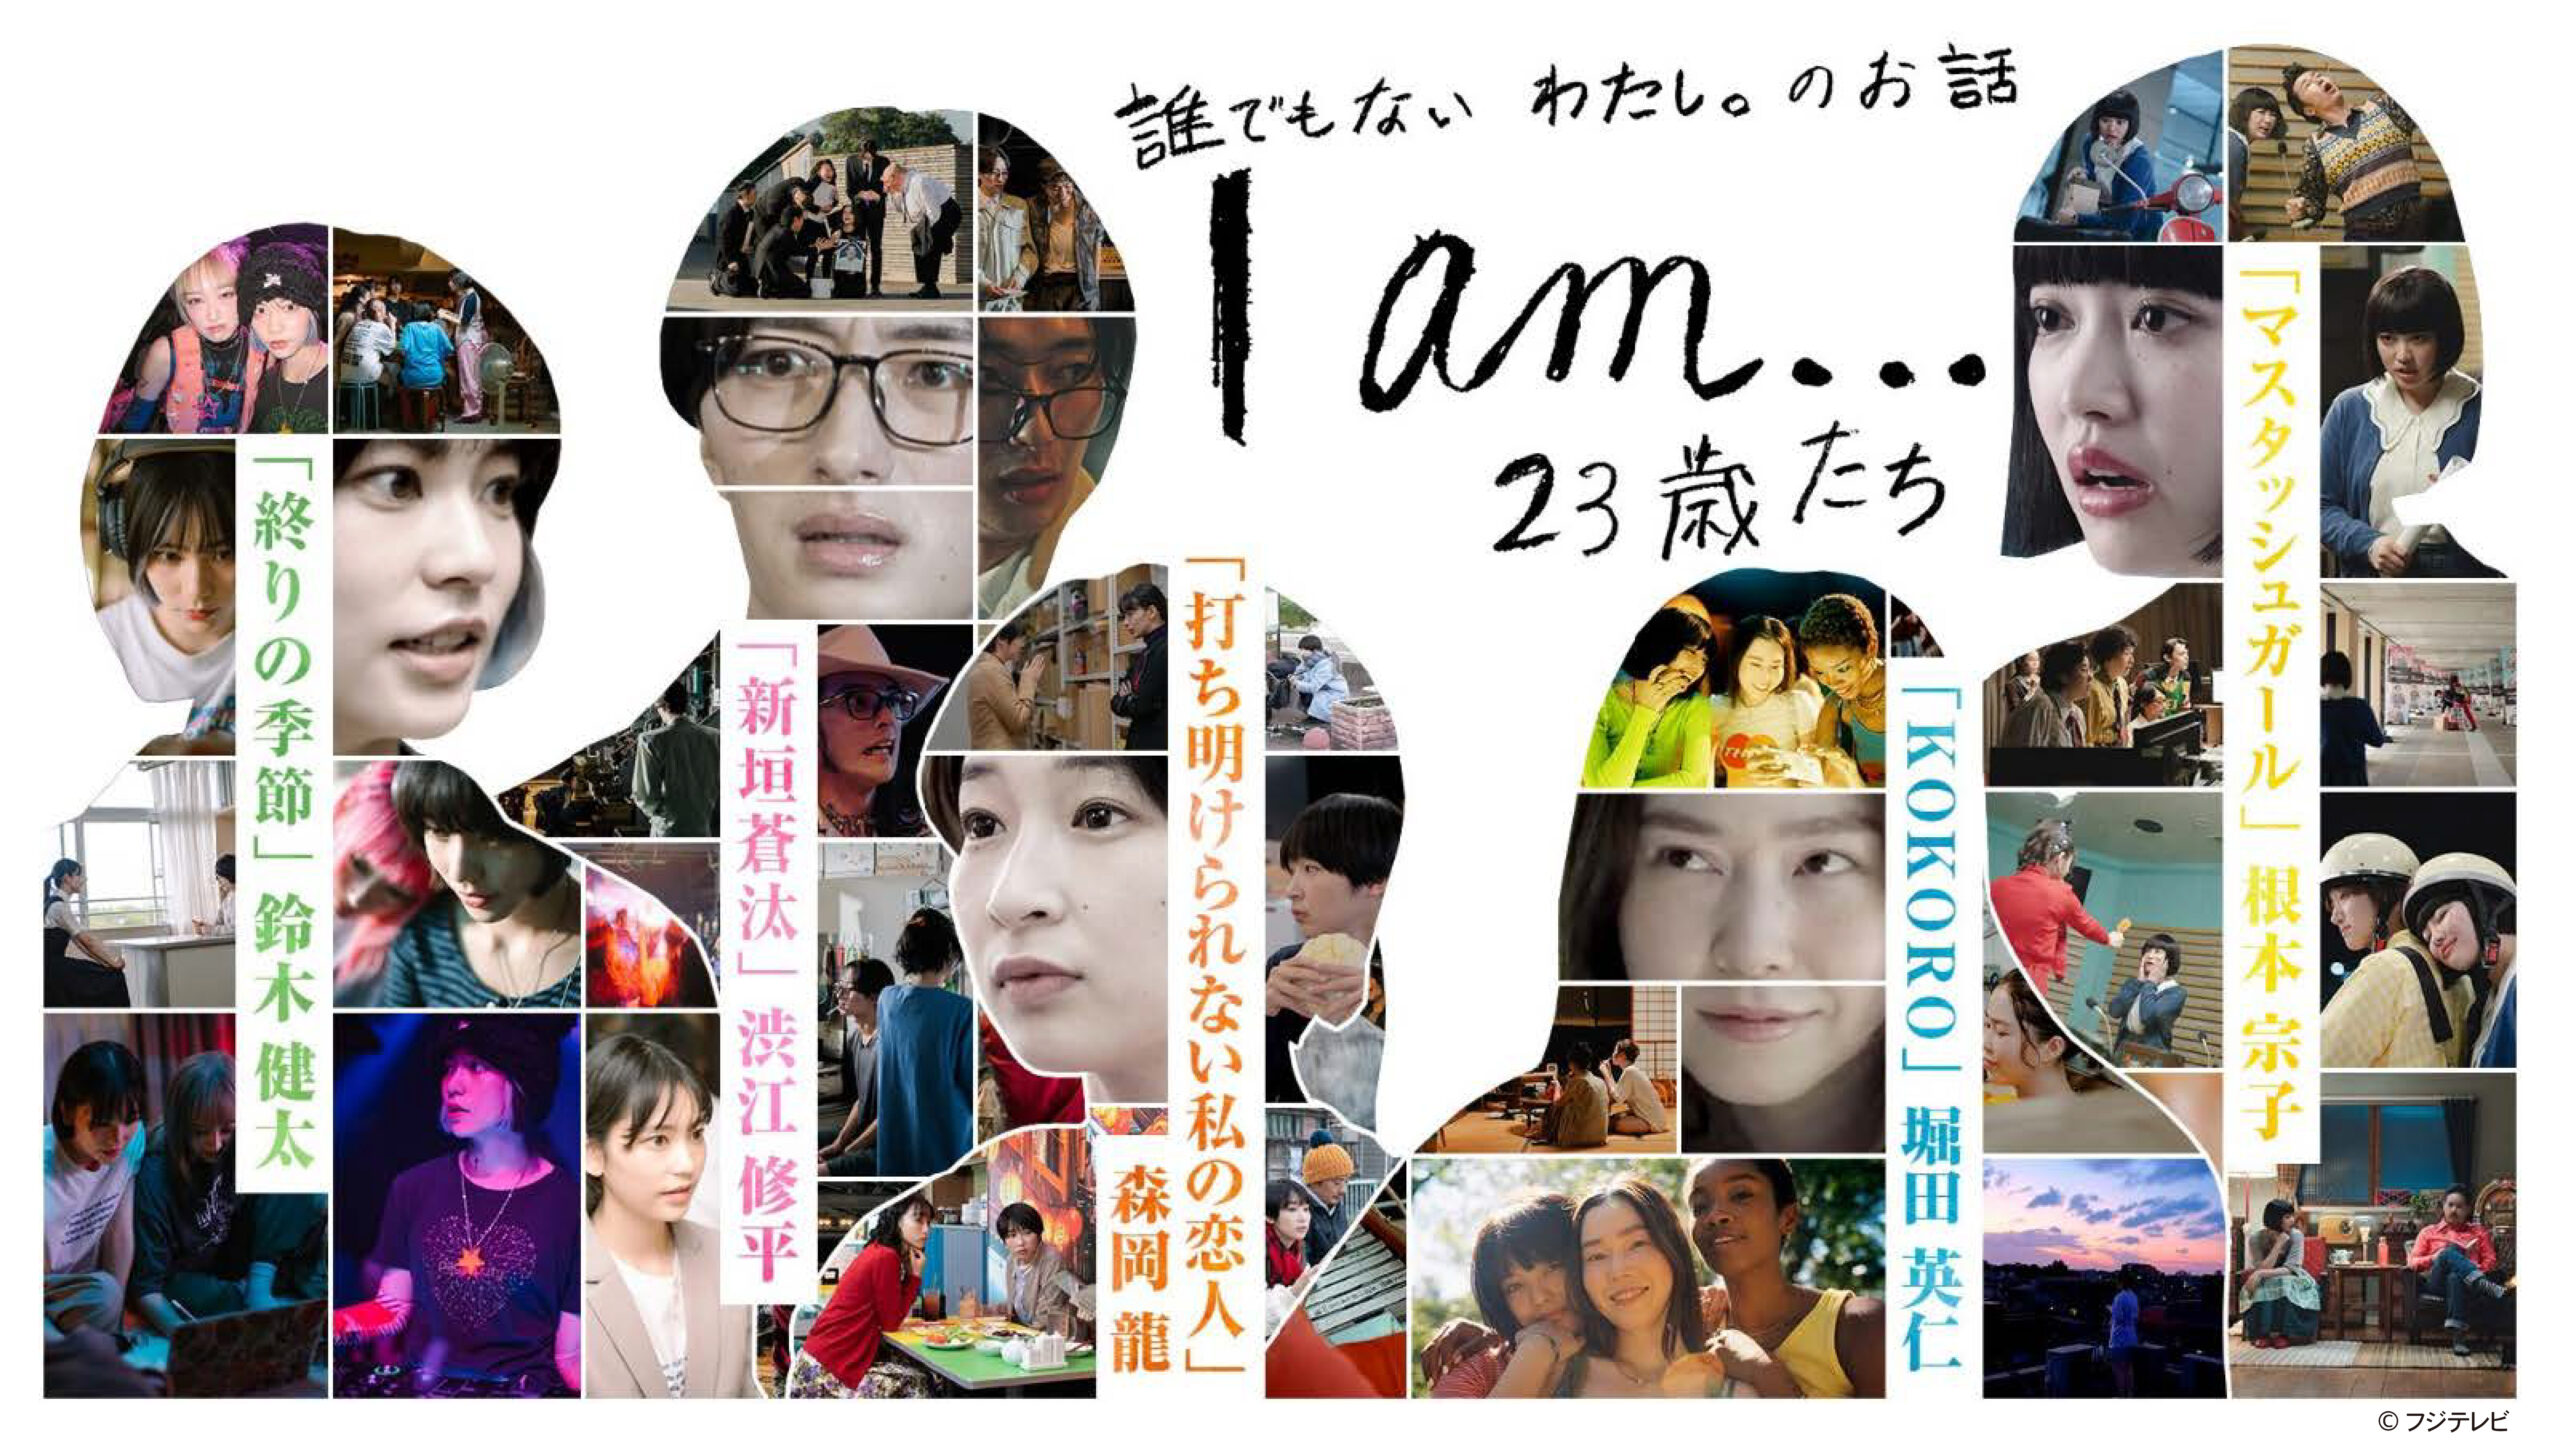 FOD original omnibus drama ‘I am… 23 Years Old, and the Others’ will be released today! Spot video clip and key visuals are also being shown for the first time!